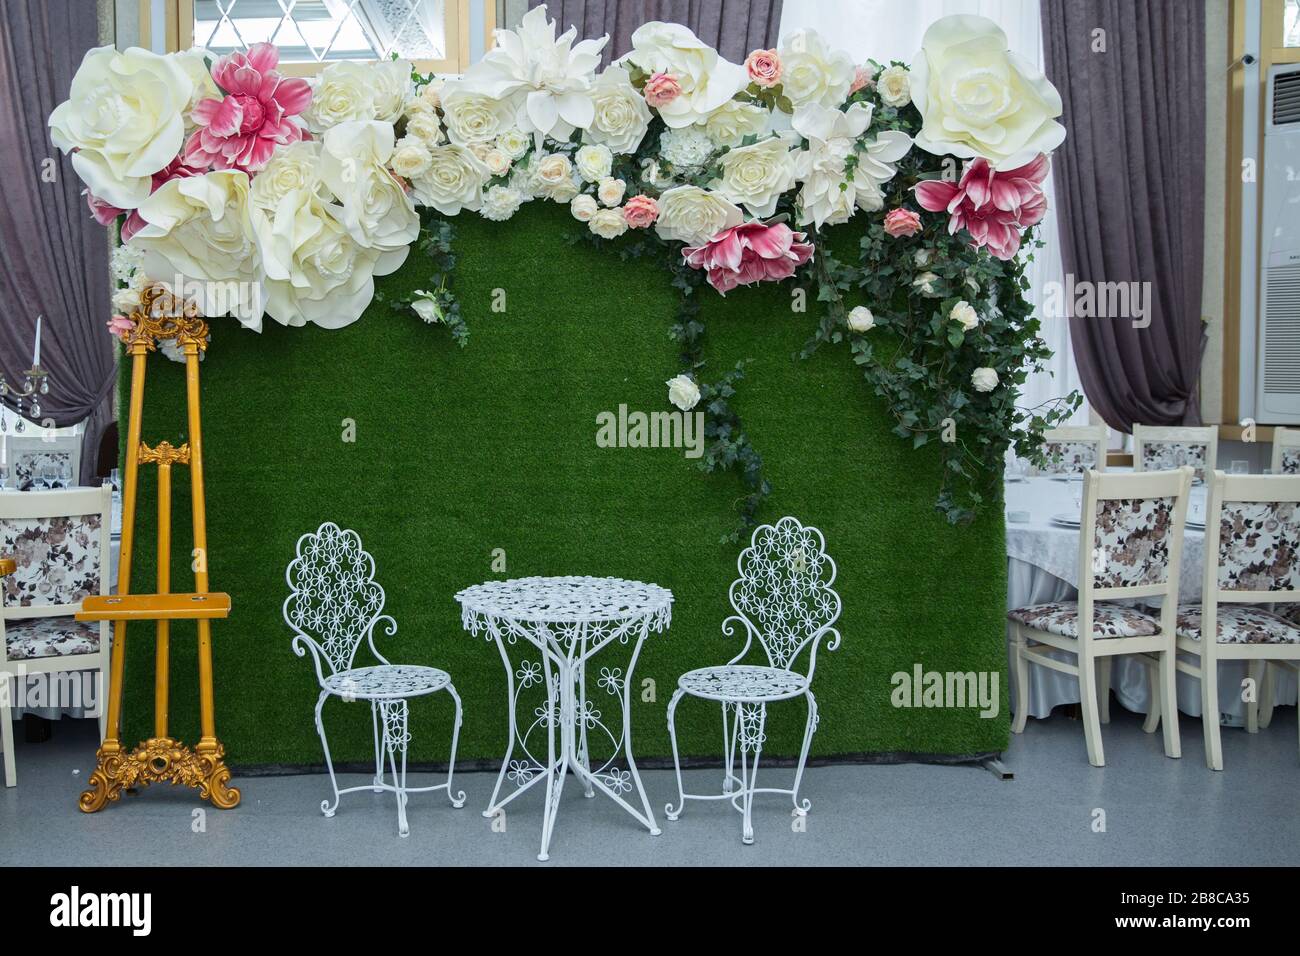 Green background, white round table, white chair, large white flower. Henna  and Engagement decor Henna stage party Stock Photo - Alamy